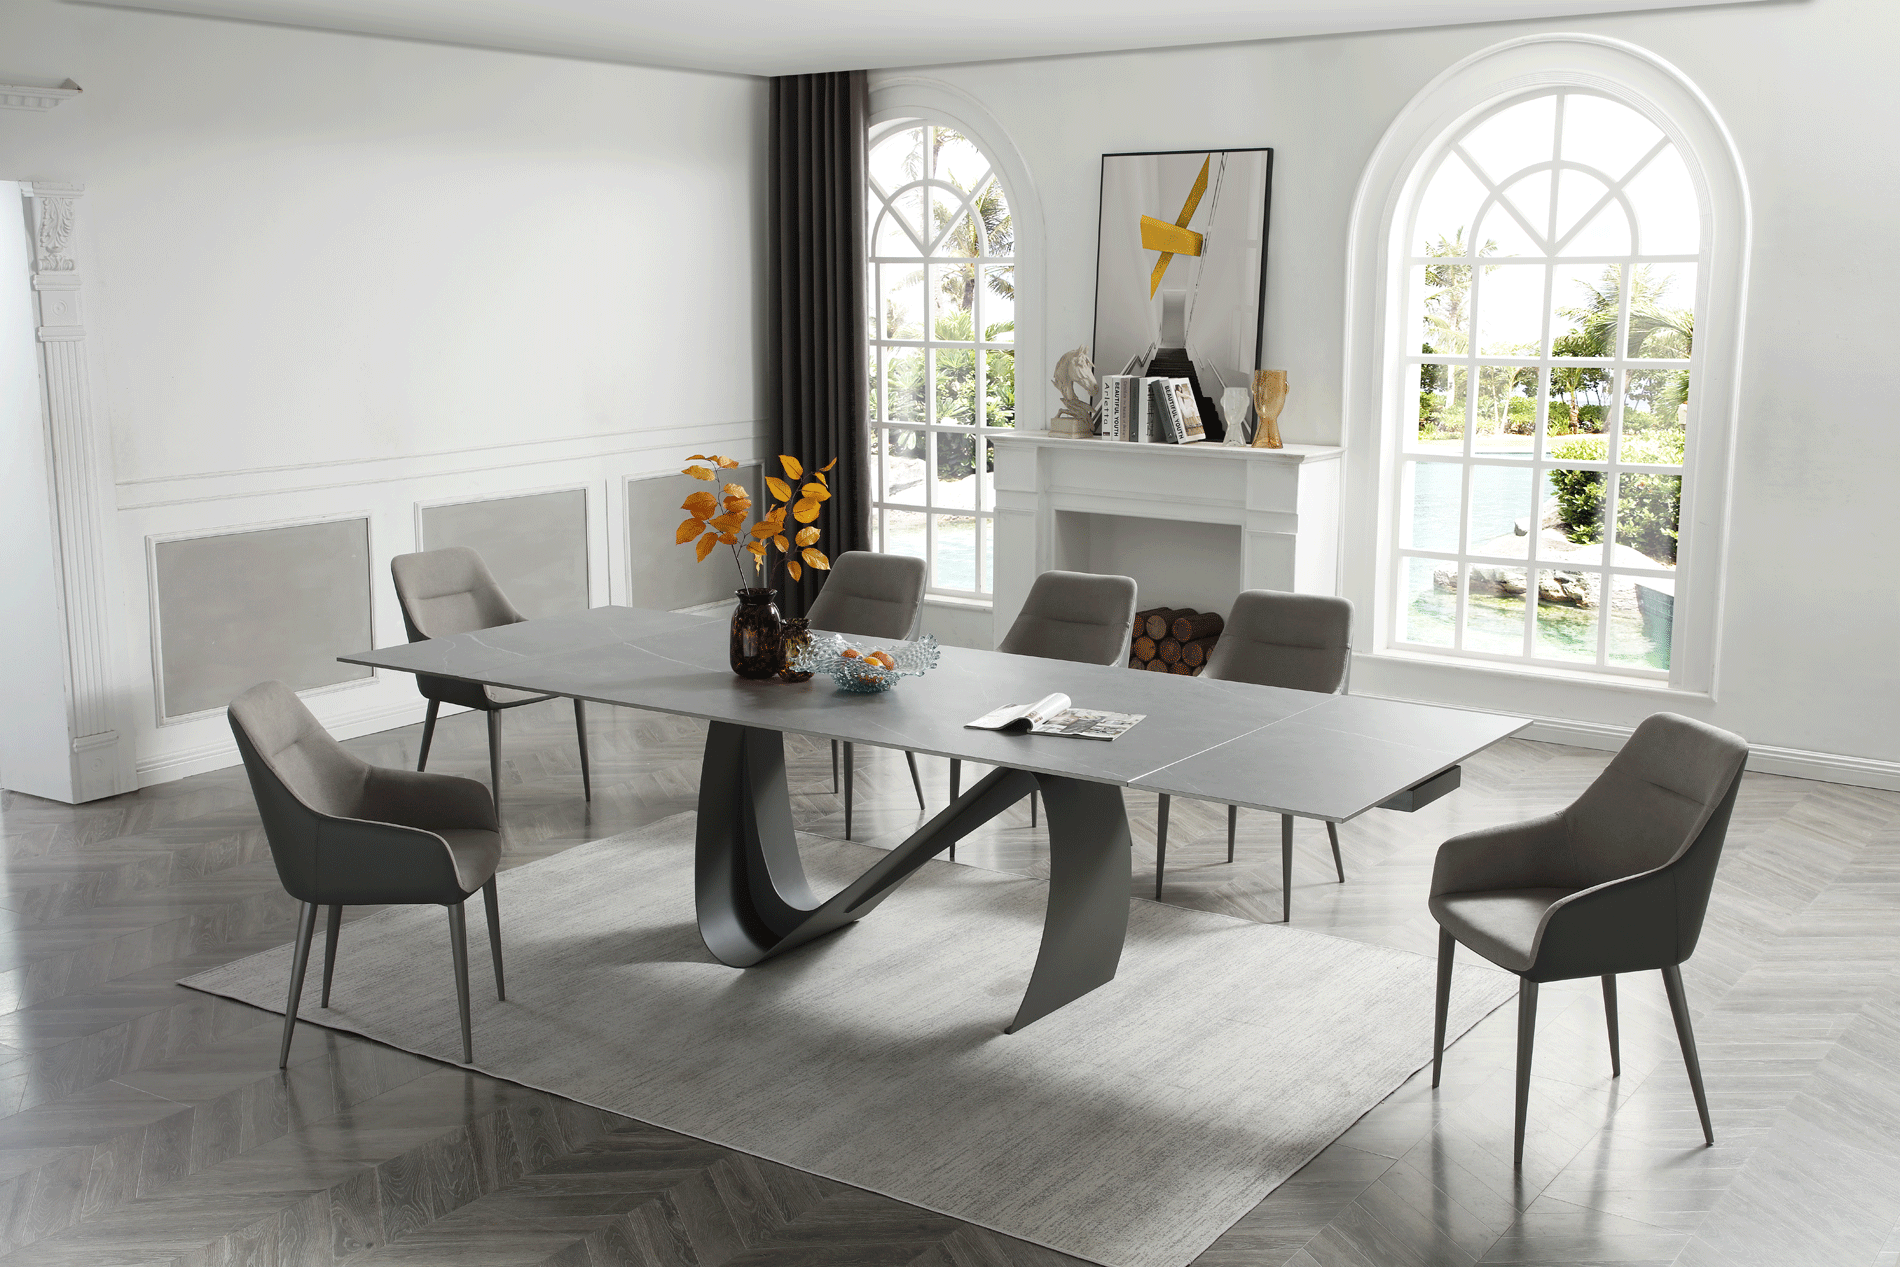 Brands Garcia Sabate REPLAY 9087 Table Dark grey with 1254 chairs